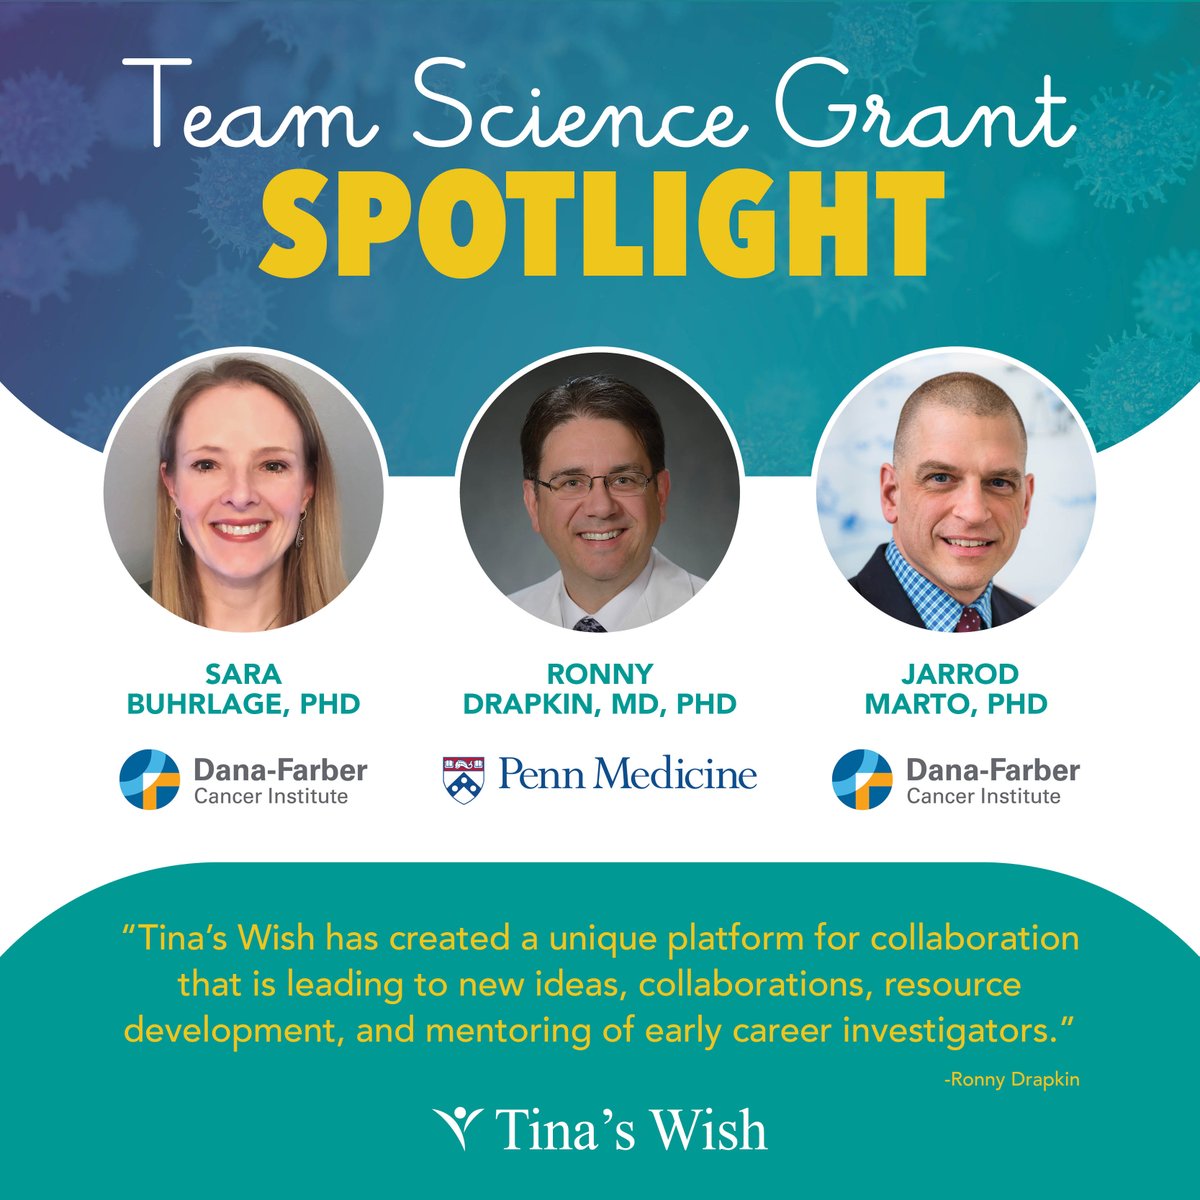 Drs. @SBuhrlage, @ronny_drapkin and Marto at @DanaFarber and @PennMedicine are examining specific epigenetic changes that lead to the malignant transformation of epithelial cells in the fallopian tubes. To learn more, visit tinaswish.org/portfolio/buhr…